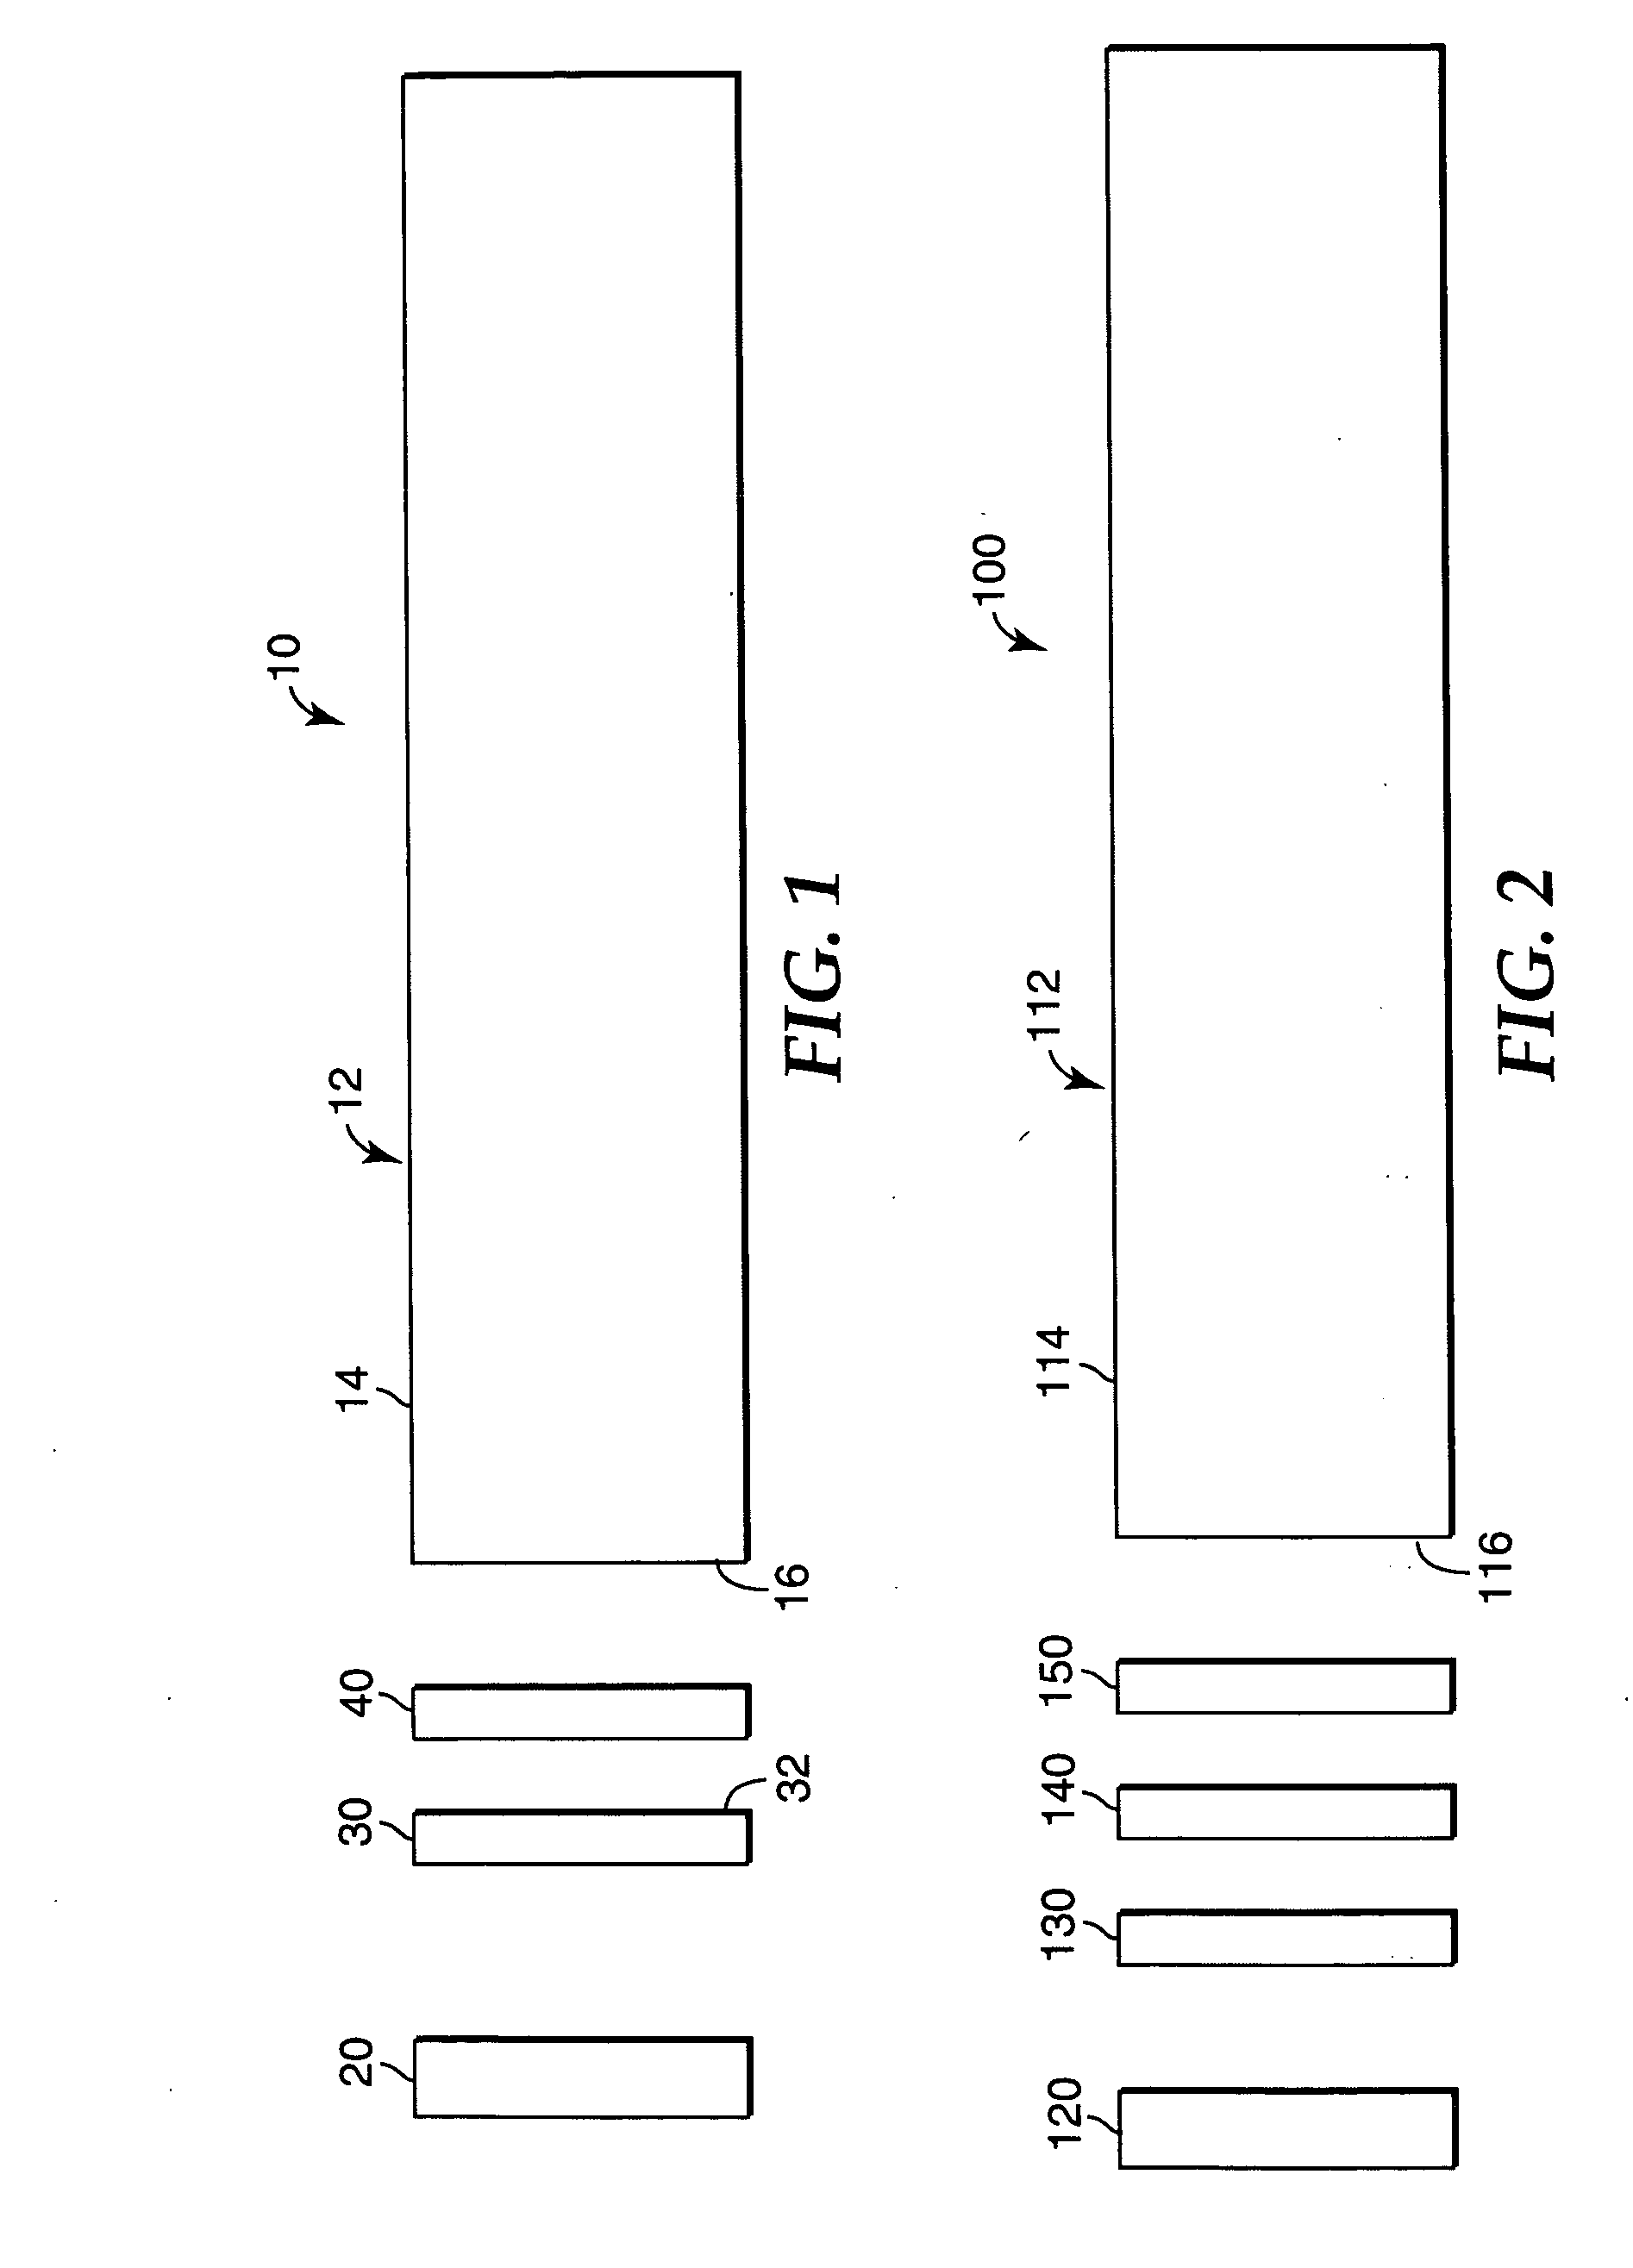 Phosphor based illumination system having a plurality of light guides and a display using same